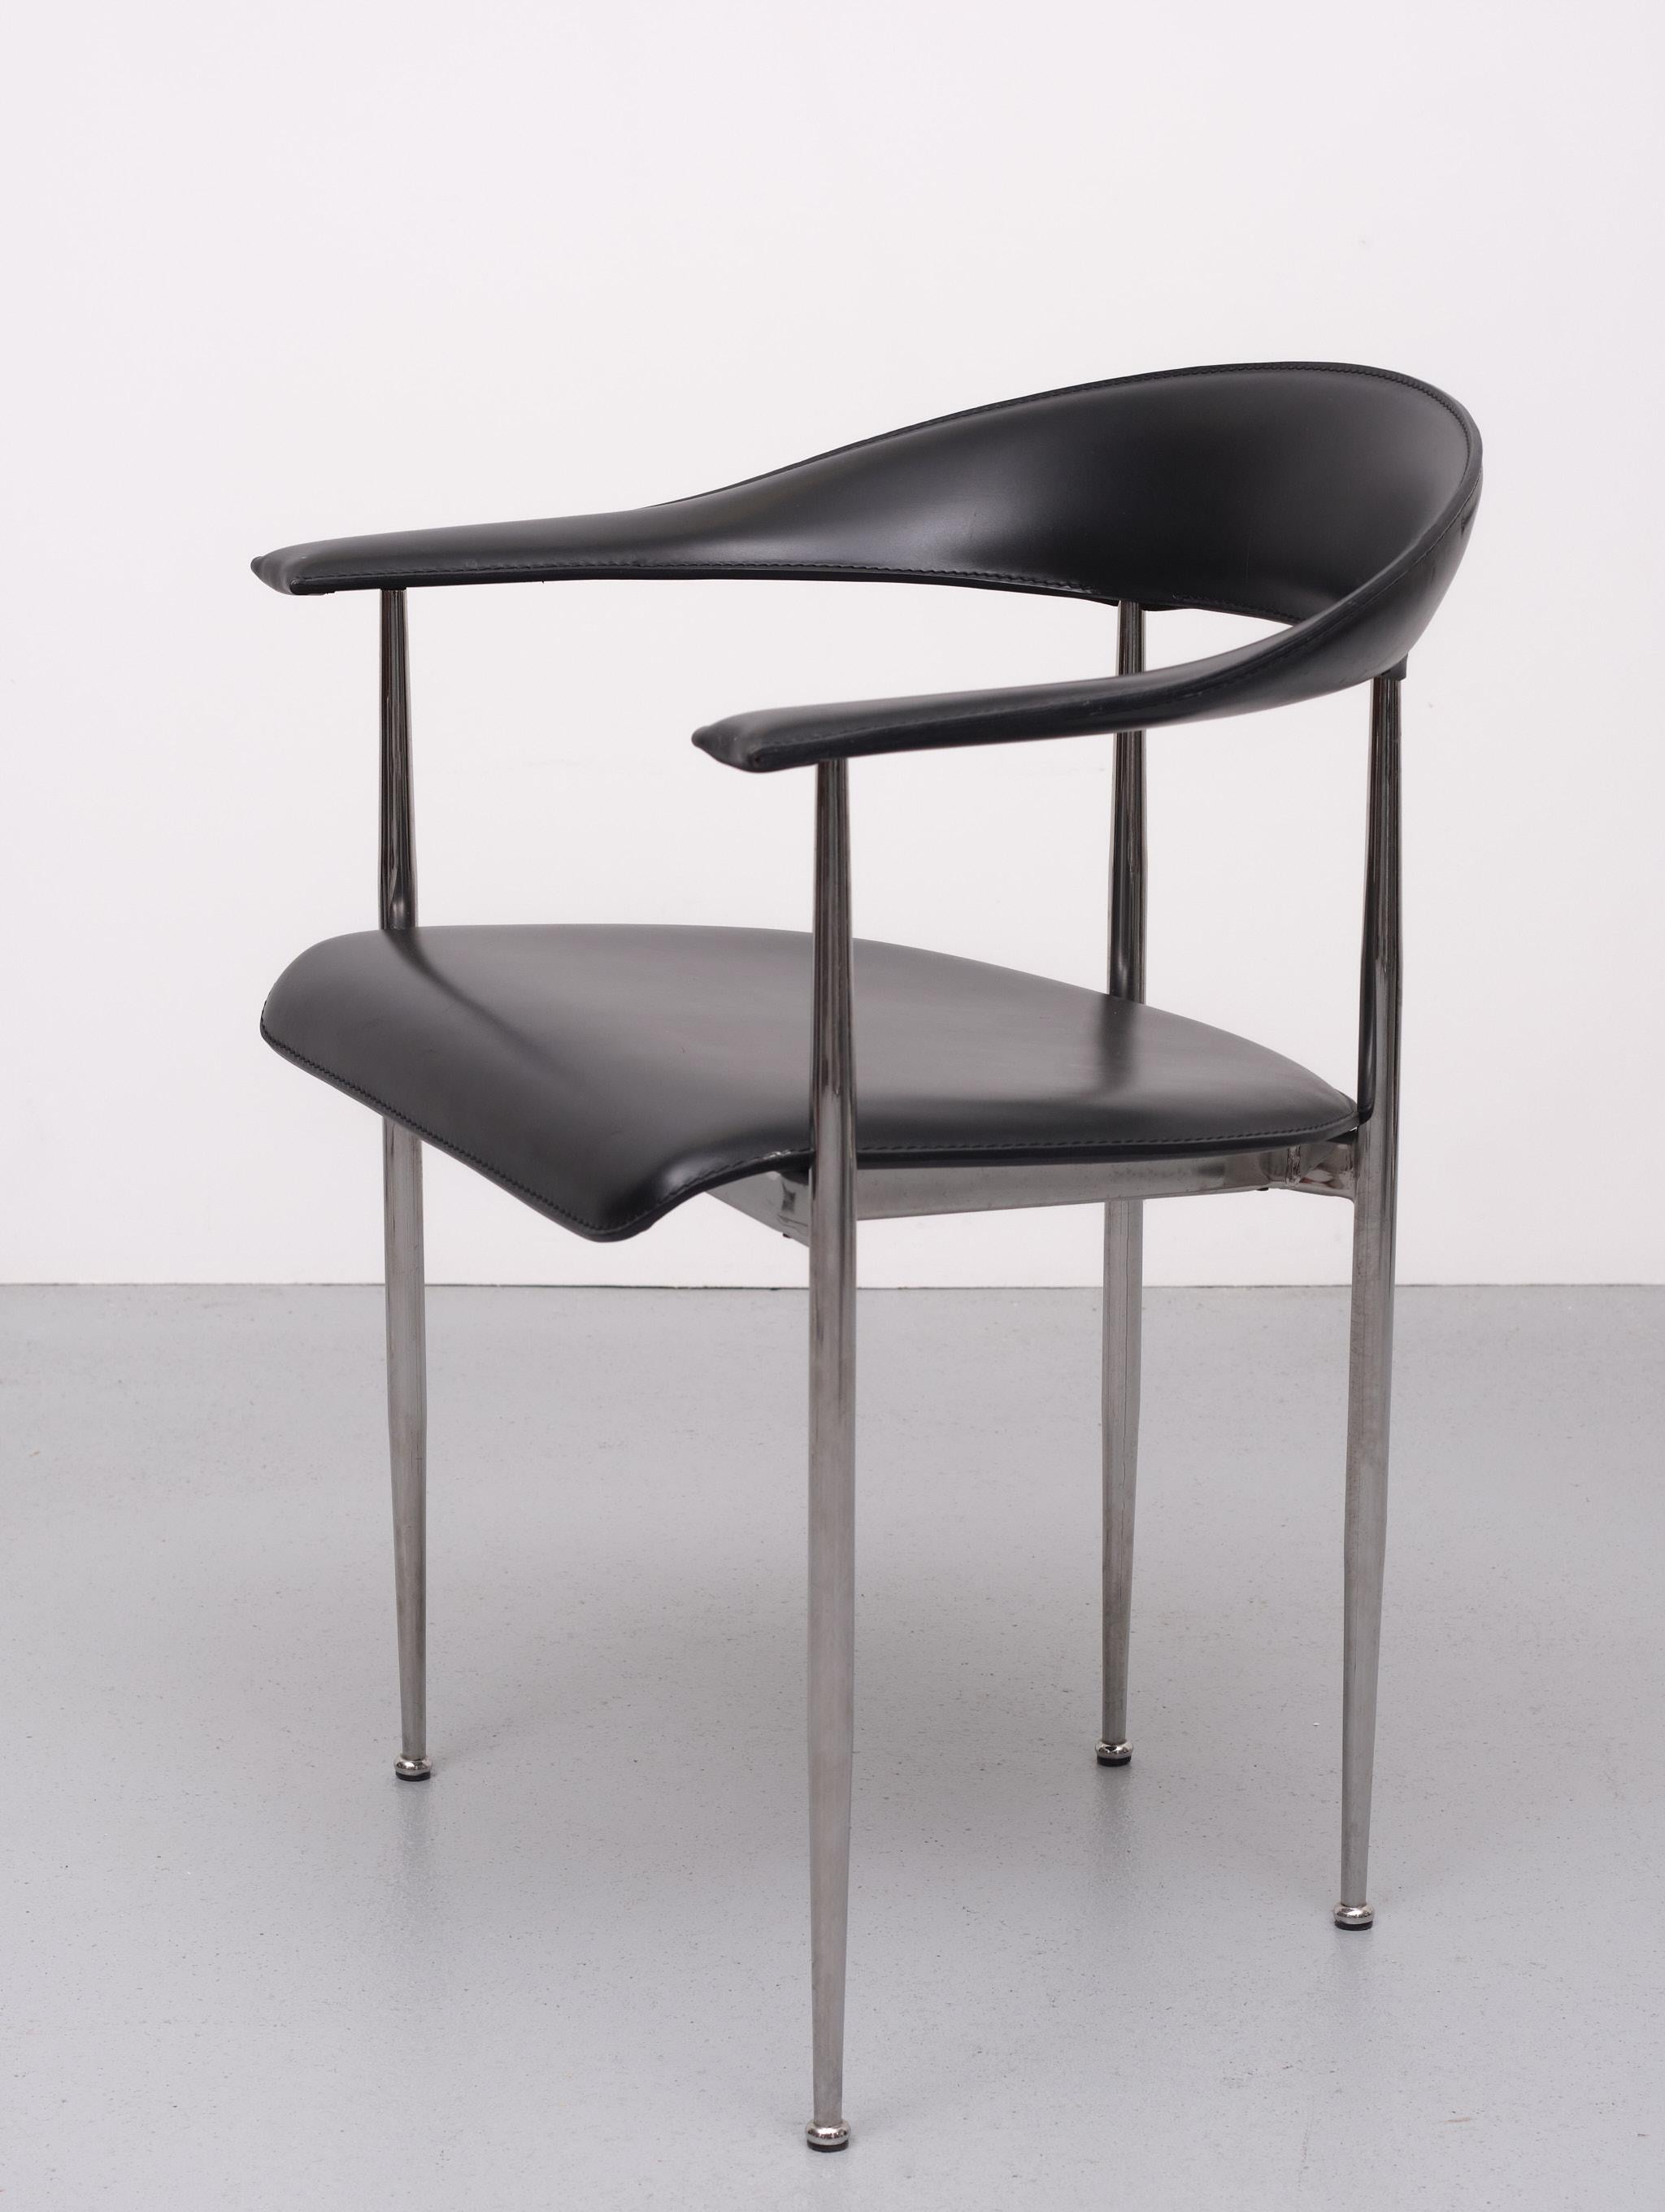 P40 armchair was designed by Giancarlo Vegni & Gianfranco Gualtierotti for Fasem in Italy, circa 1980.
The seat and armrest are upholstered in a high quality black leather. Very sturdy chromed tubular steel base. Excellent condition.